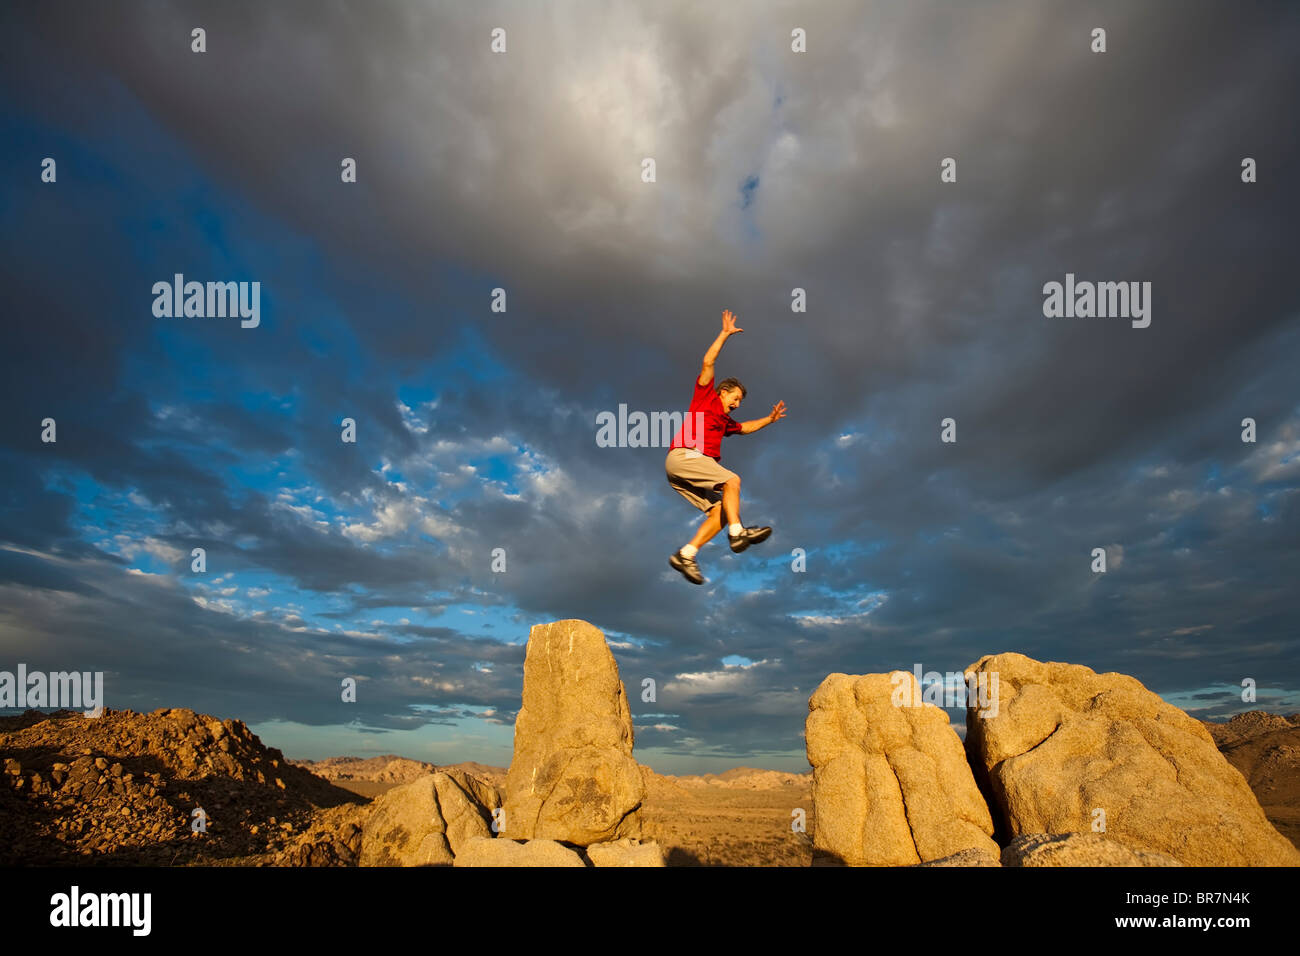 Rock climber leaps across a gap  on the summit of a pinnacle after a successful ascent as storm clouds build in the setting sun. Stock Photo